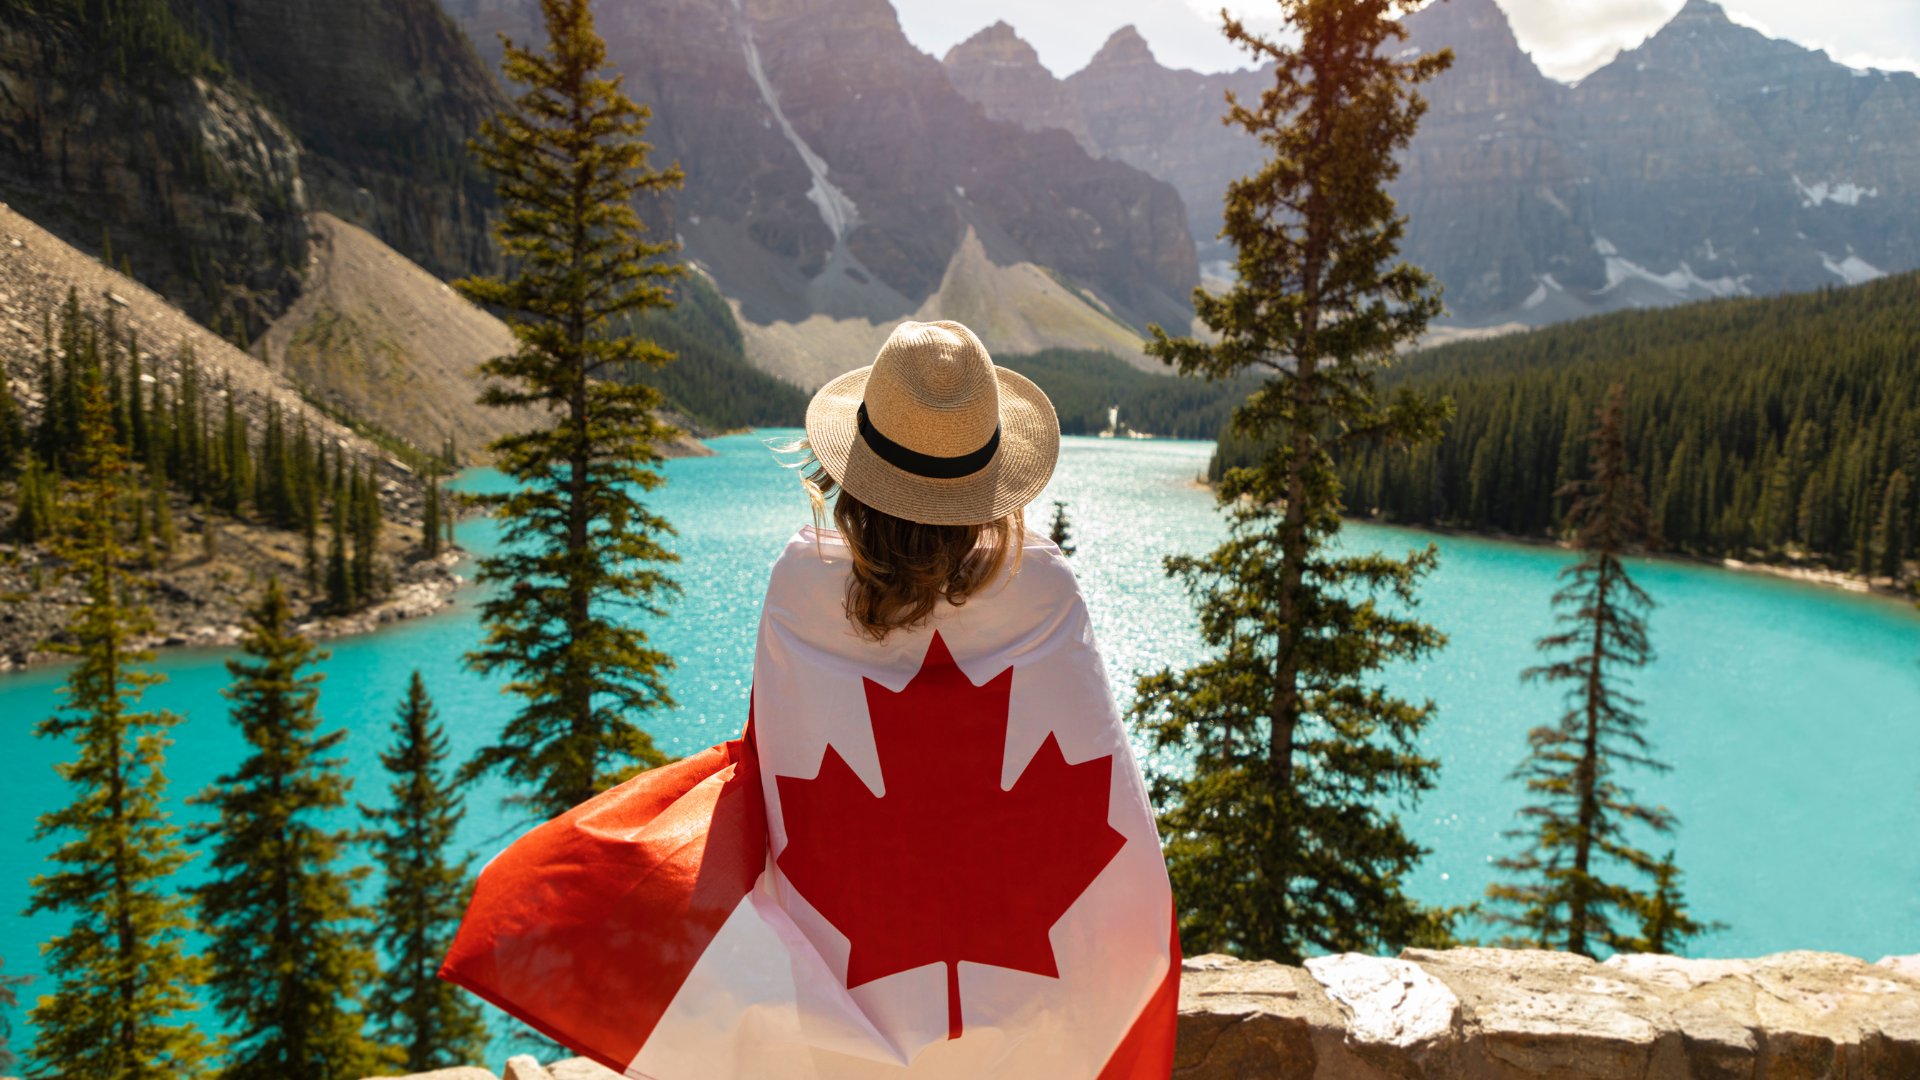 Tourists or visitors to Canada have many natural wonders to explore.